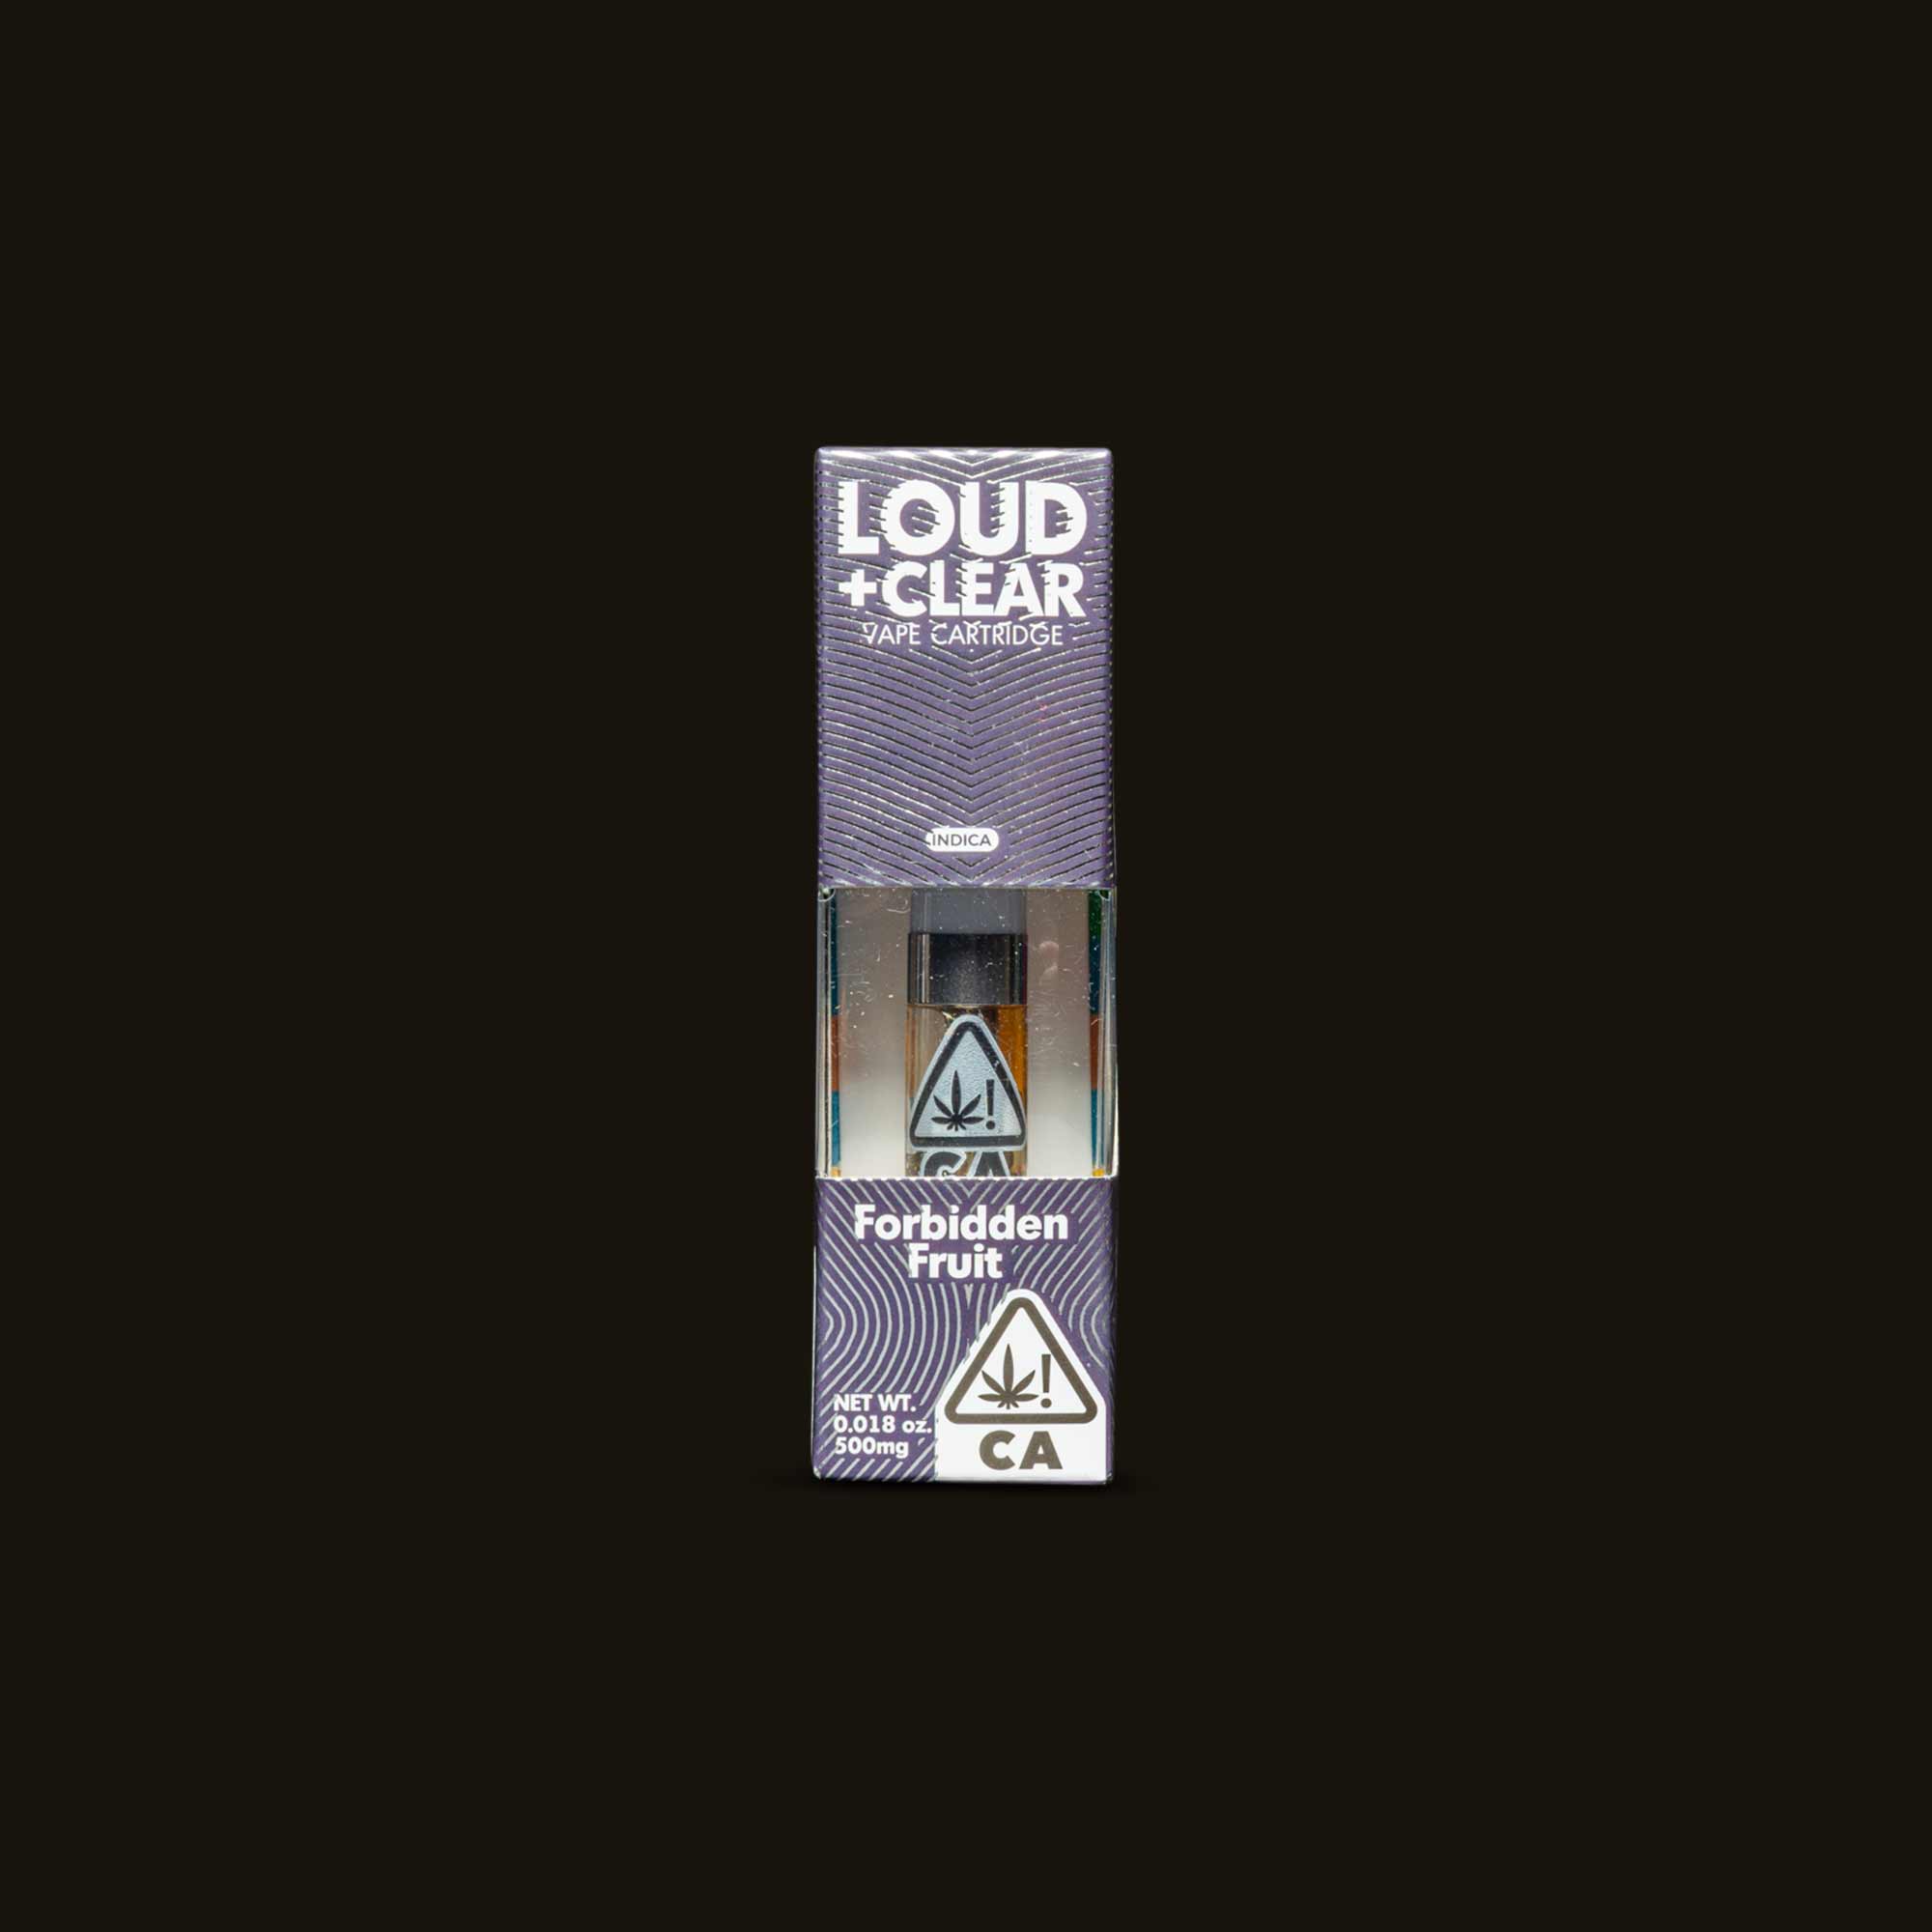 ABSOLUTEXTRACTS-FORBIDDENFRUIT-LOUDCLEAR-PREROLLS-CA-FRONT-PACKAGING-1-671529